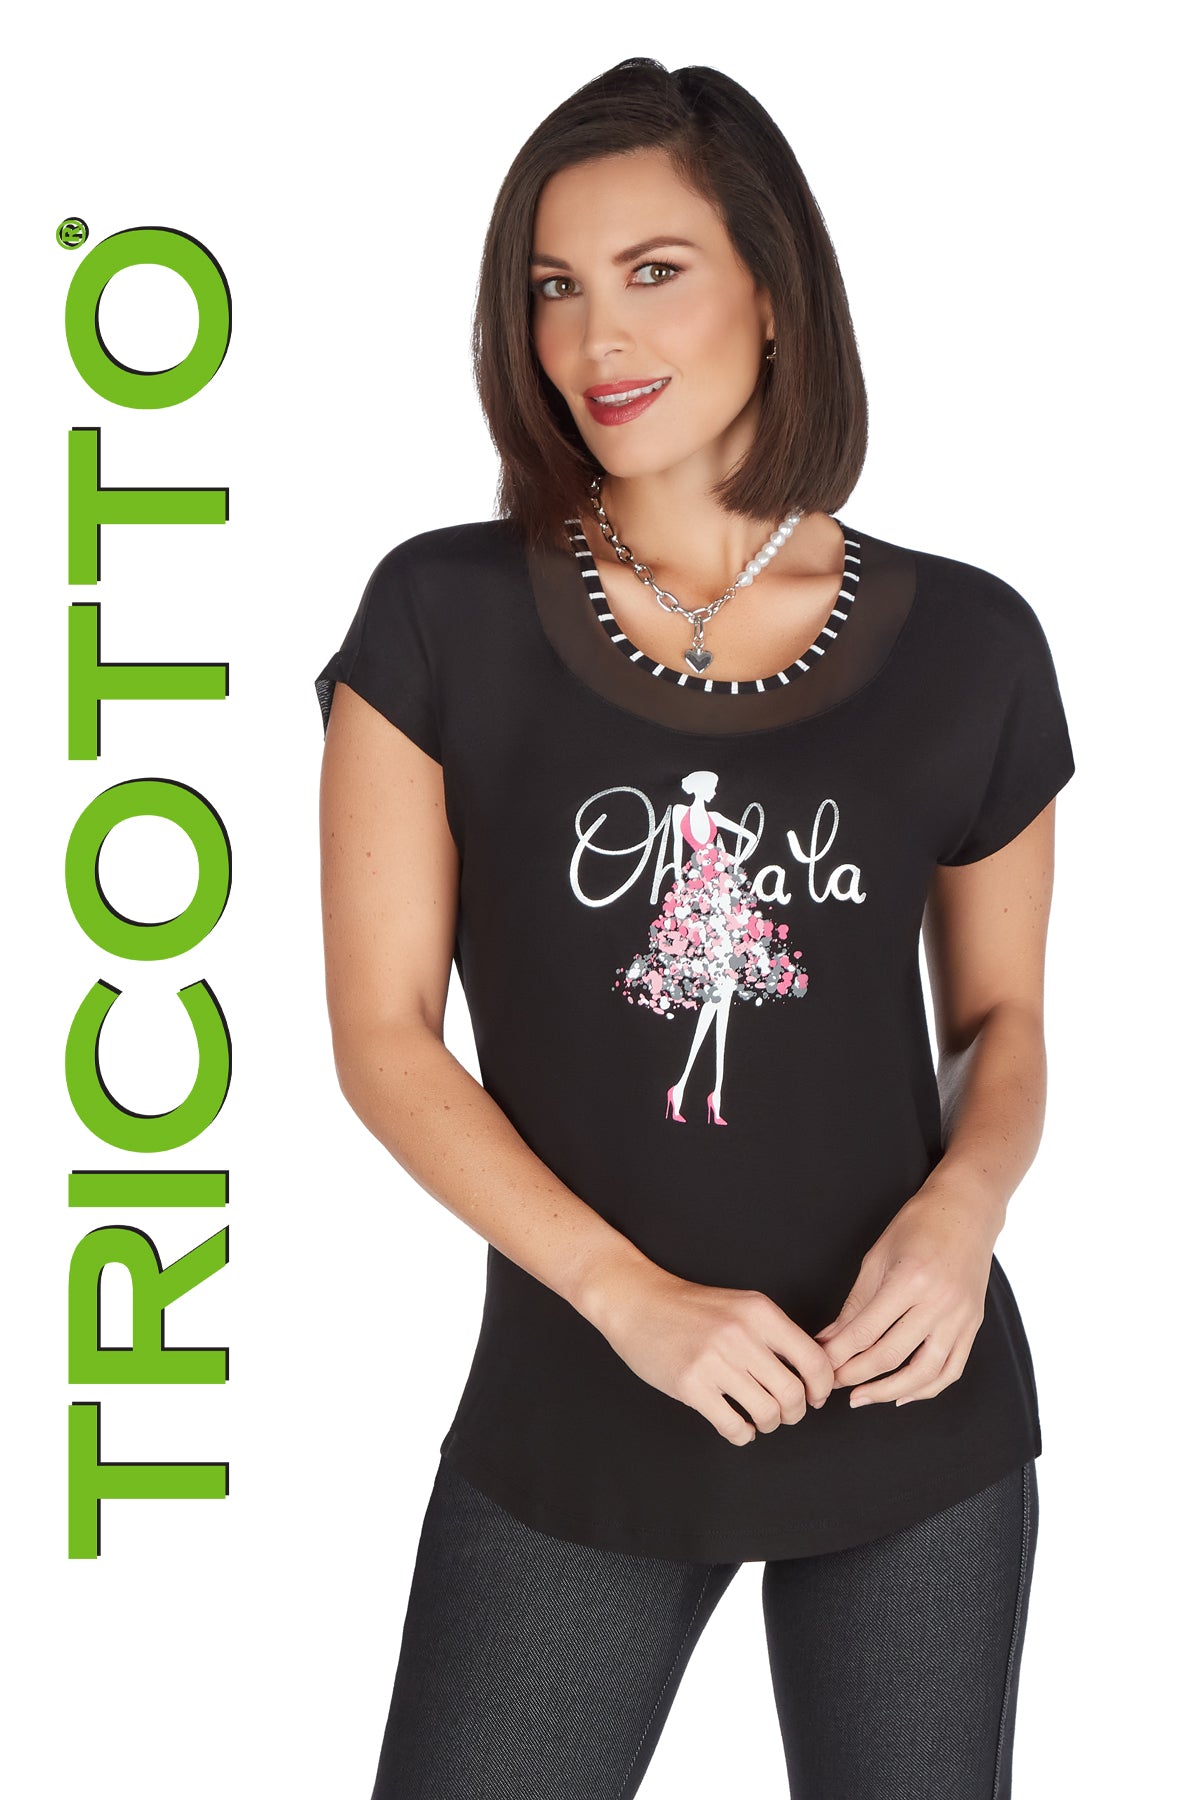 Tricotto T-shirts-Buy Tricotto T-shirts Online-Tricotto Clothing Montreal-Tricotto Clothing Quebec-Tricotto Jeans-Jane & John Clothing